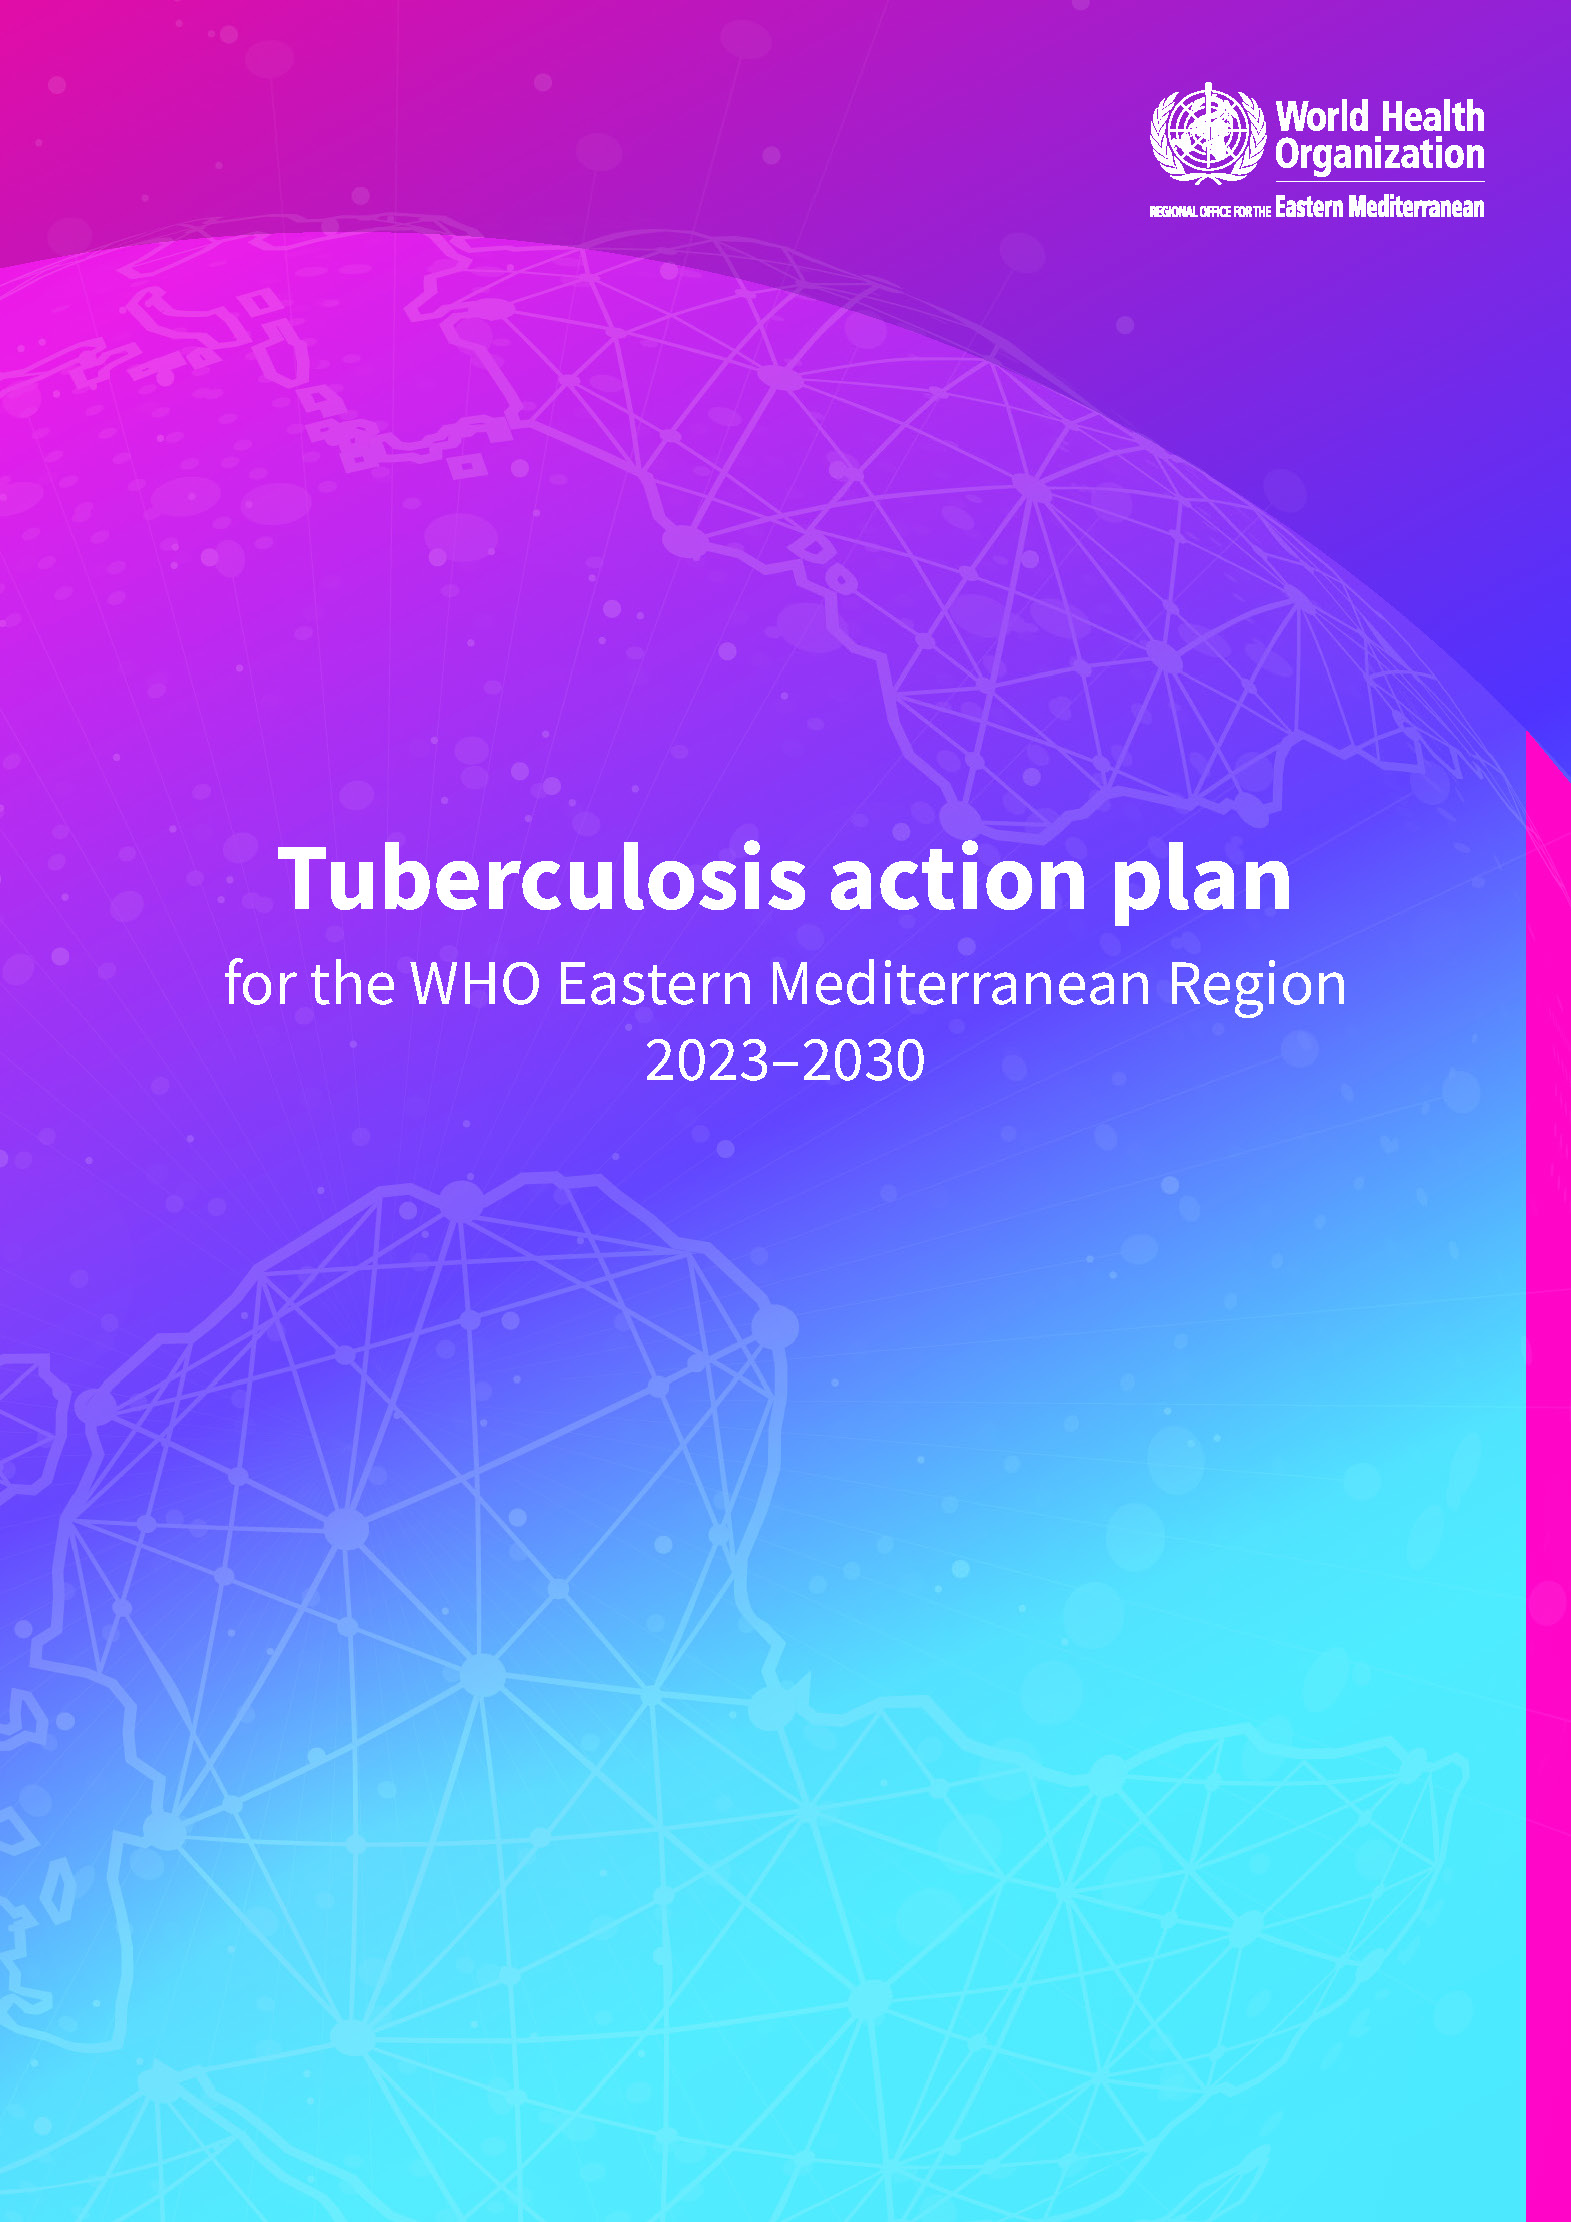 Tuberculosis action plan for the WHO Eastern Mediterranean Region 2023-2030